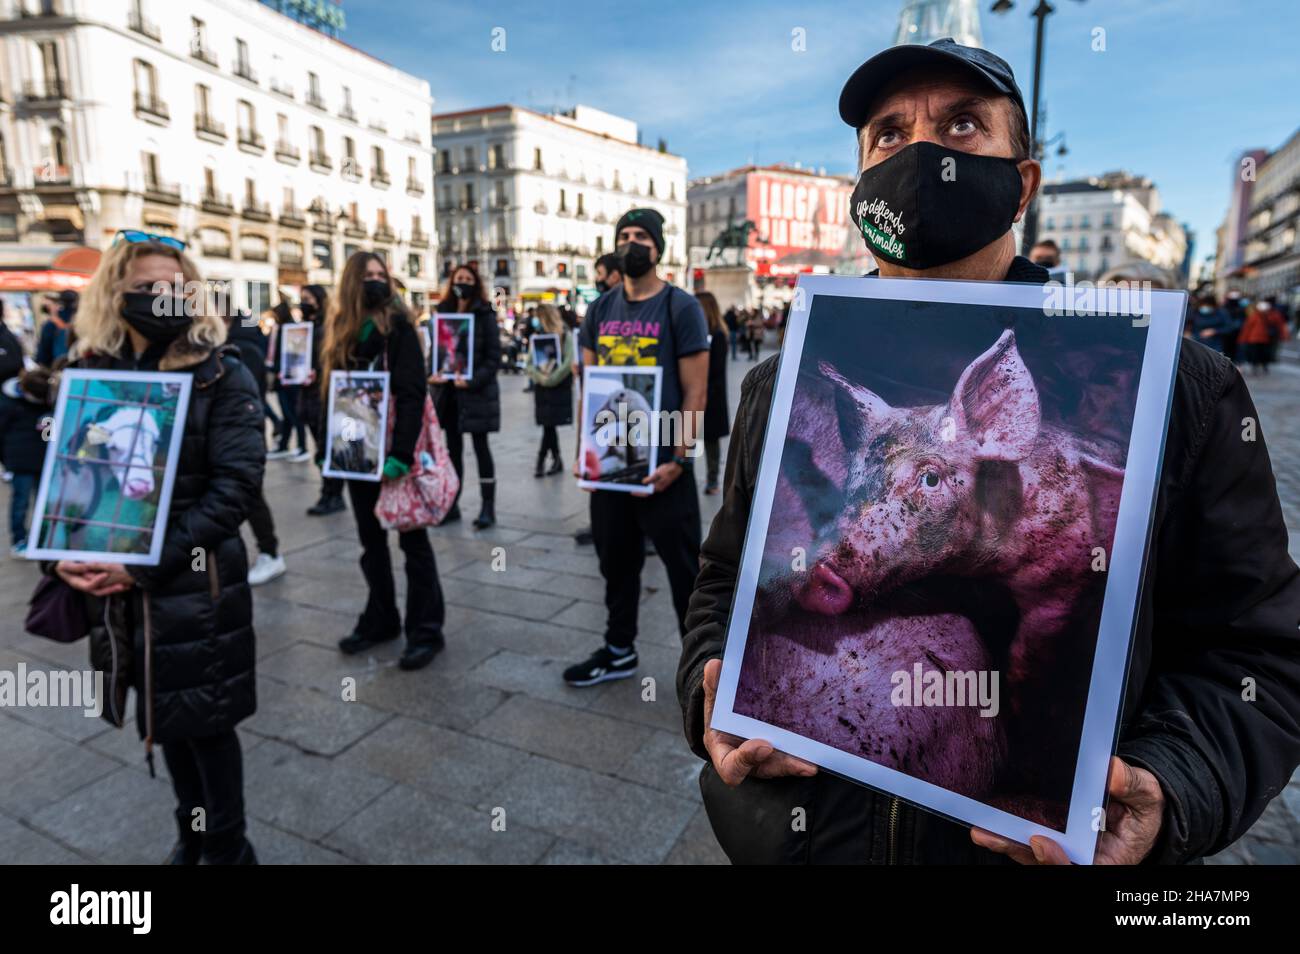 Madrid, Spain. 11th Dec, 2021. Animal rights activists carrying pictures of animals in farms protesting against animal abuse called by 'Animal Equality' (Igualdad Animal) group, denouncing the impact of industrial livestock on the planet. Credit: Marcos del Mazo/Alamy Live News Stock Photo